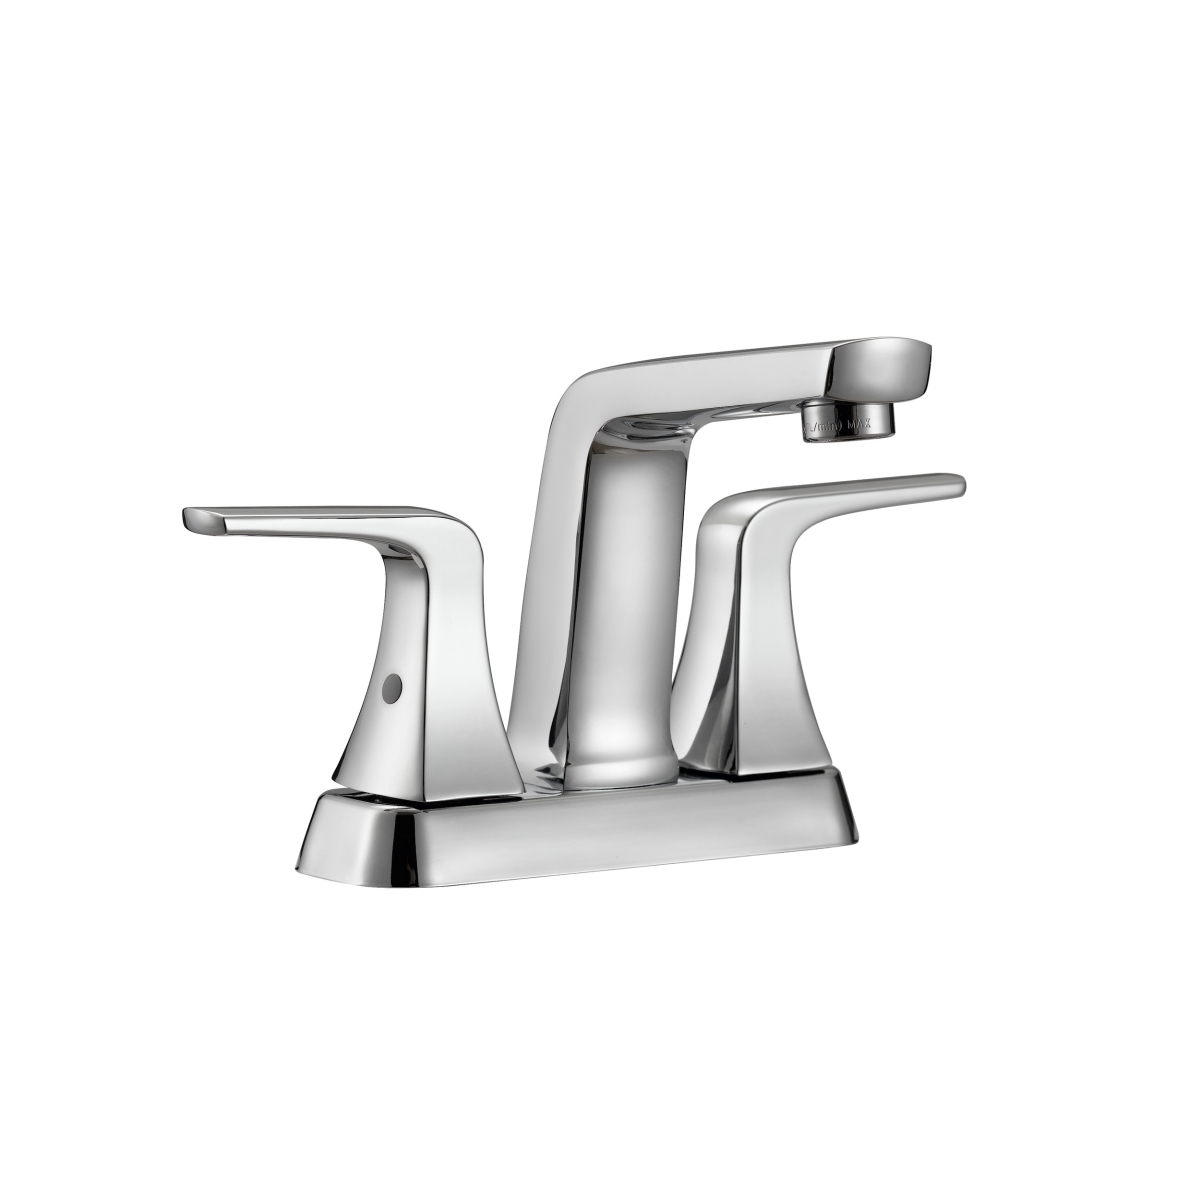 Brf1050c 4 Inch Centerset Dual Handle Stainless Steel 9.8" X 6.3" X 5.6" Bathroom Faucet